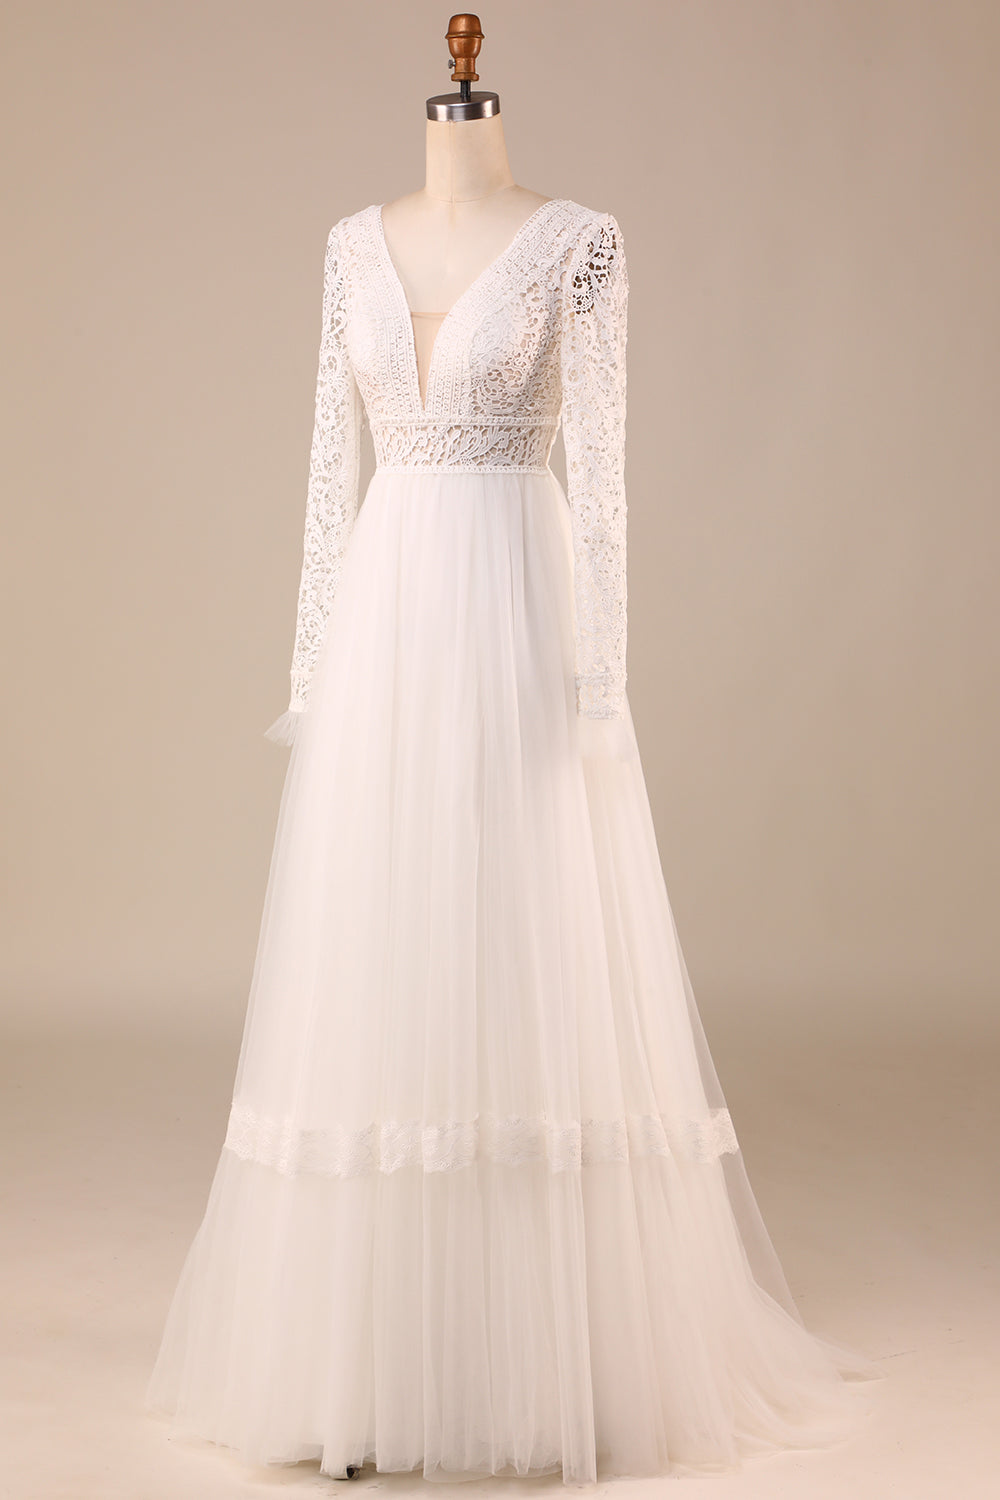 Ivory Long Sleeves Tulle A-Line Wedding Dress with Lace